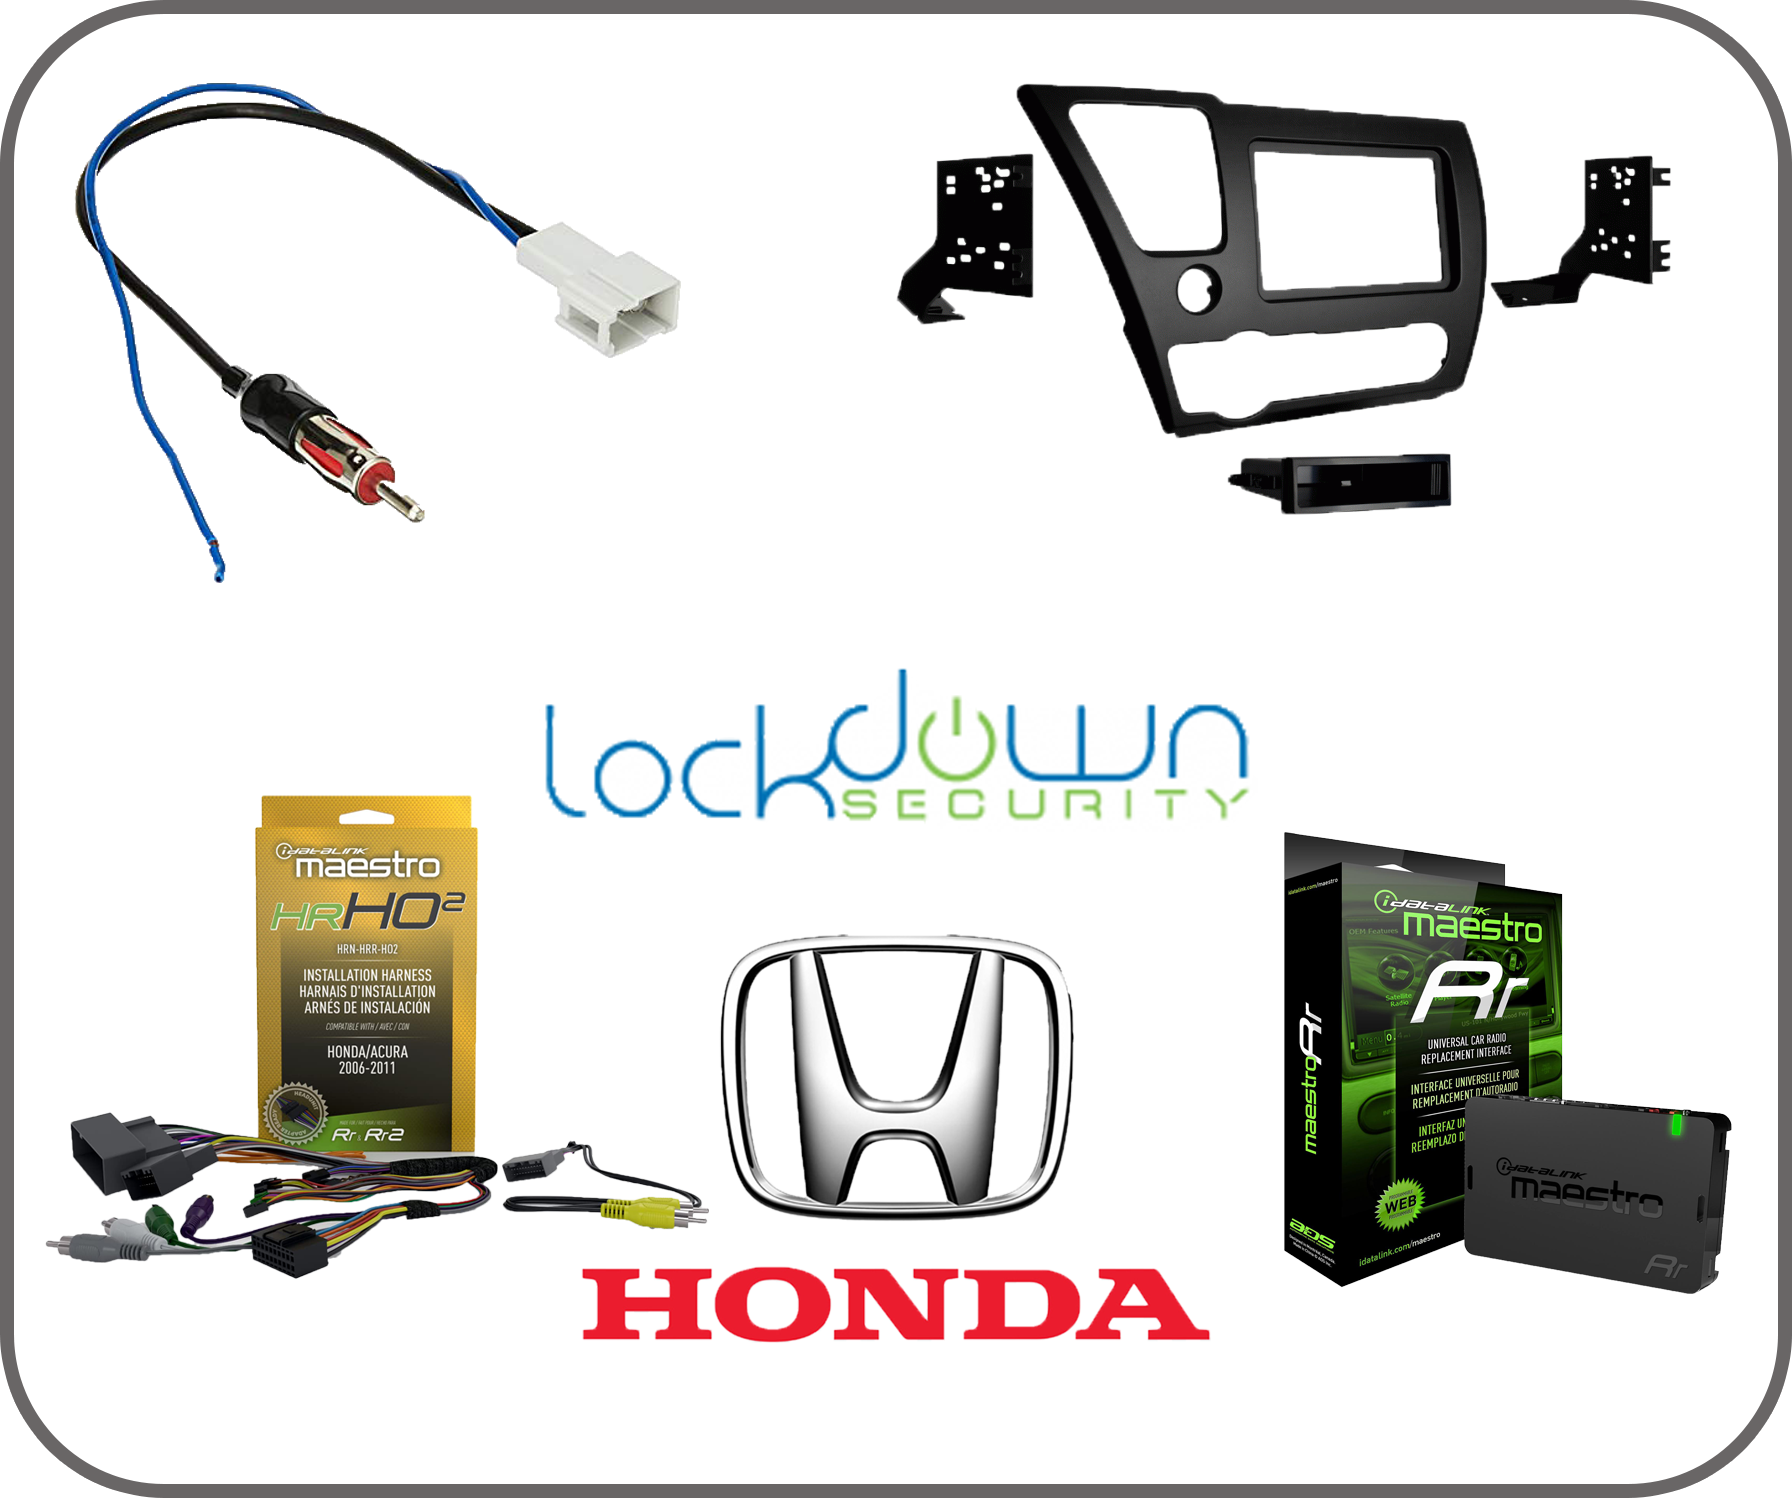 MAESTRO ⭕ Honda Civic 2013-2015 Radio Replacement Parts Bundle ⭕ Includes Metra 99-7882B Mount Kit, Metra 40-HD11 Antenna Adapter, Maestro ADS-MRR Interface, Maestro HRN-HRR-HO2 Wire Harness